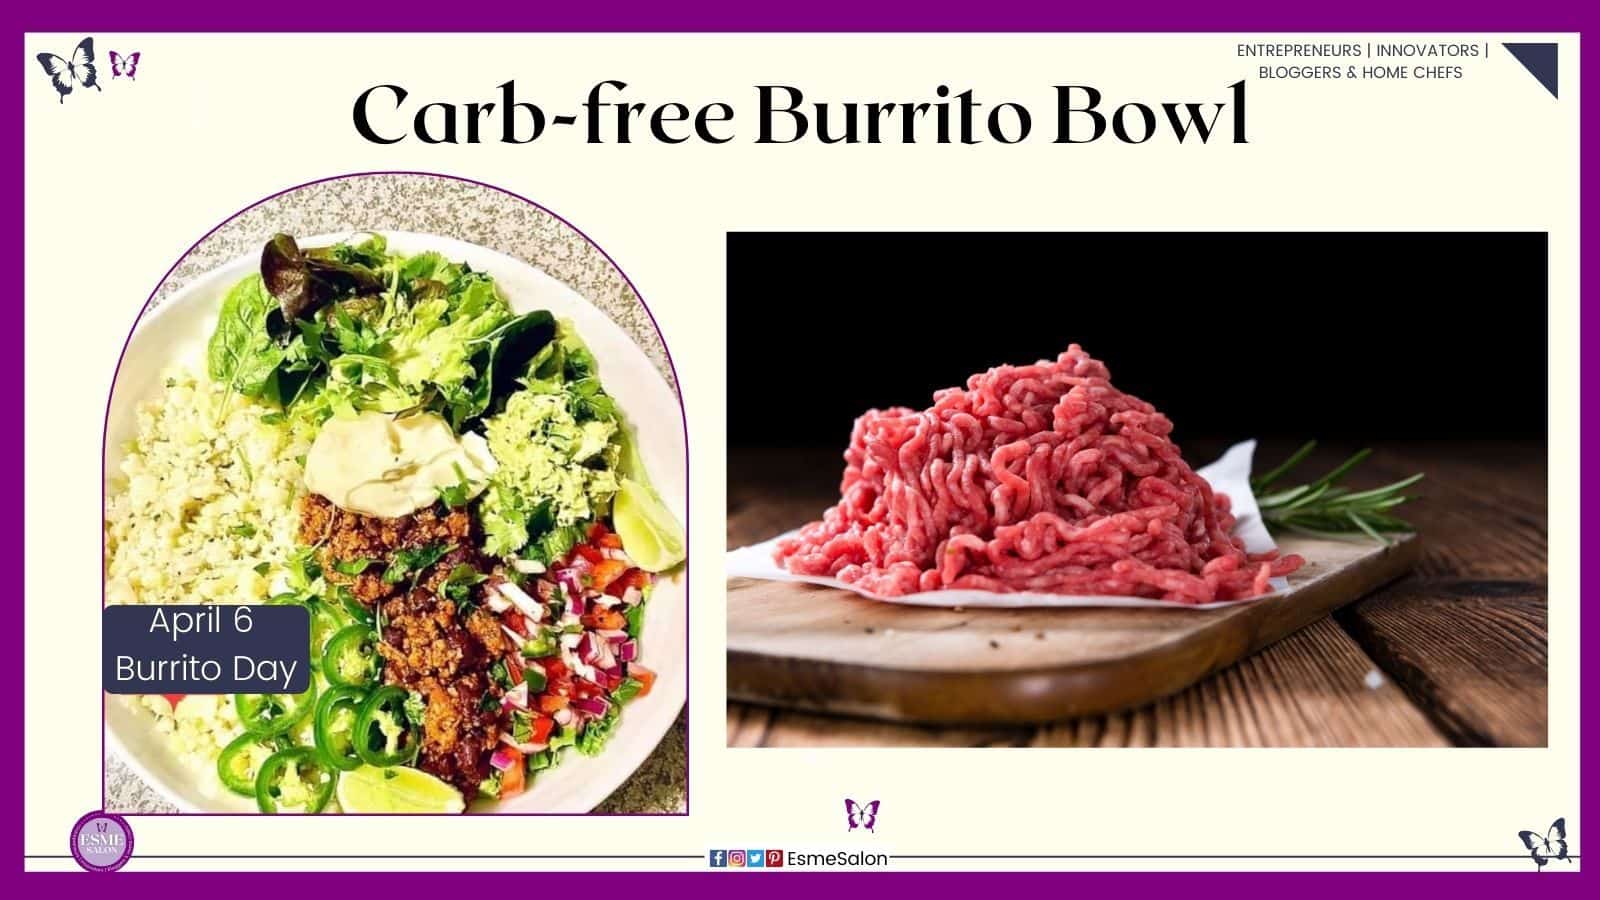 an image of a burrito bowl with a Carb-free Burrito meal